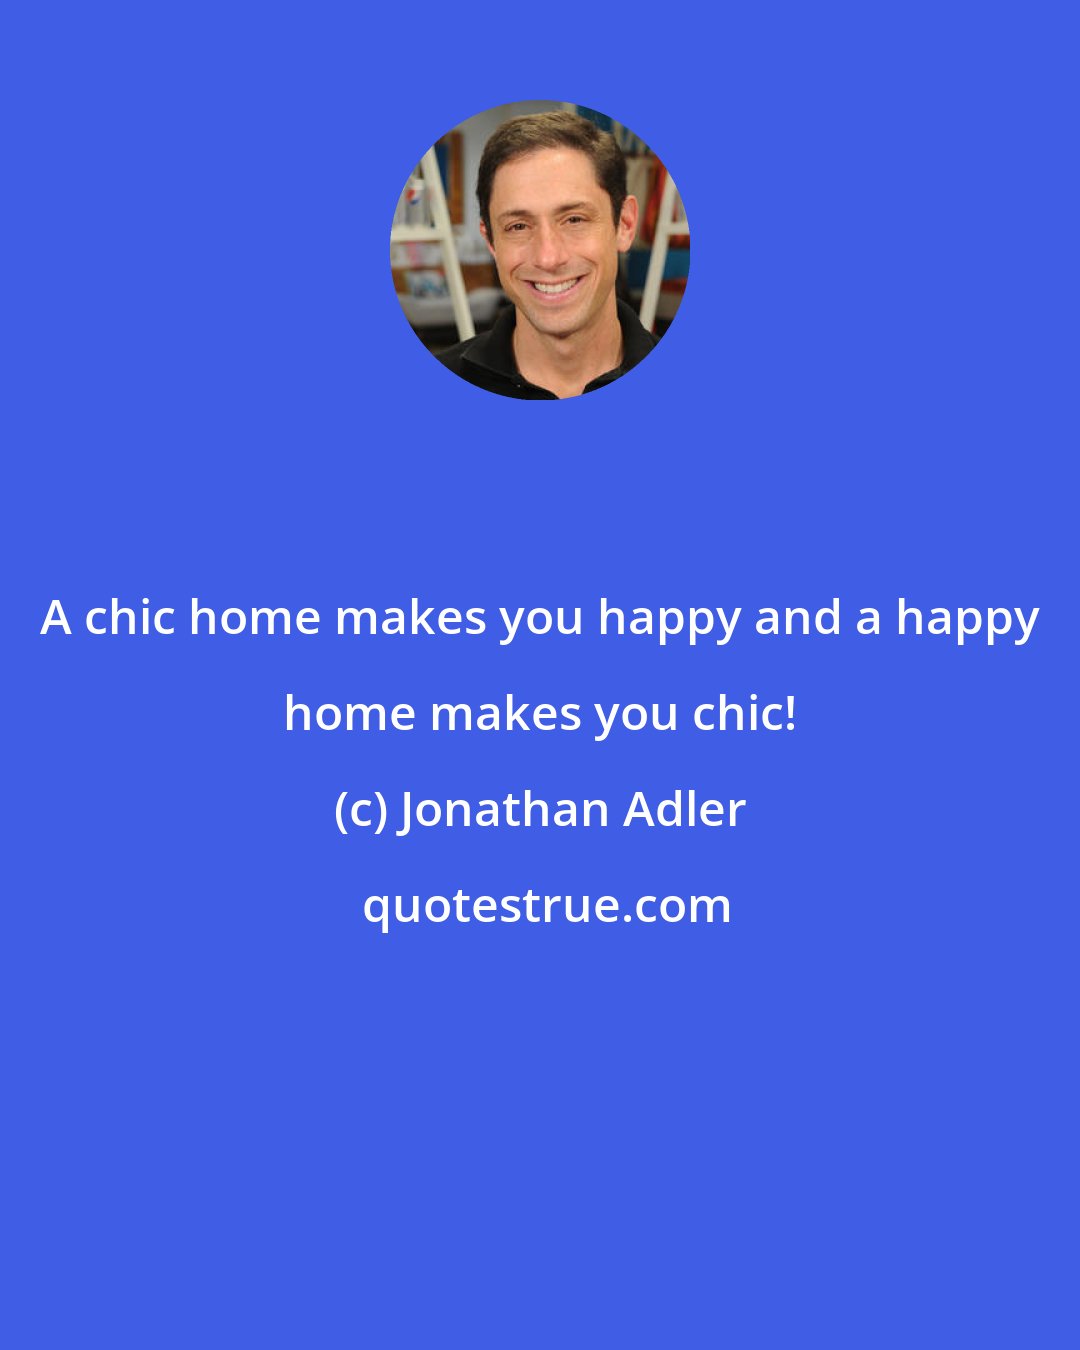 Jonathan Adler: A chic home makes you happy and a happy home makes you chic!